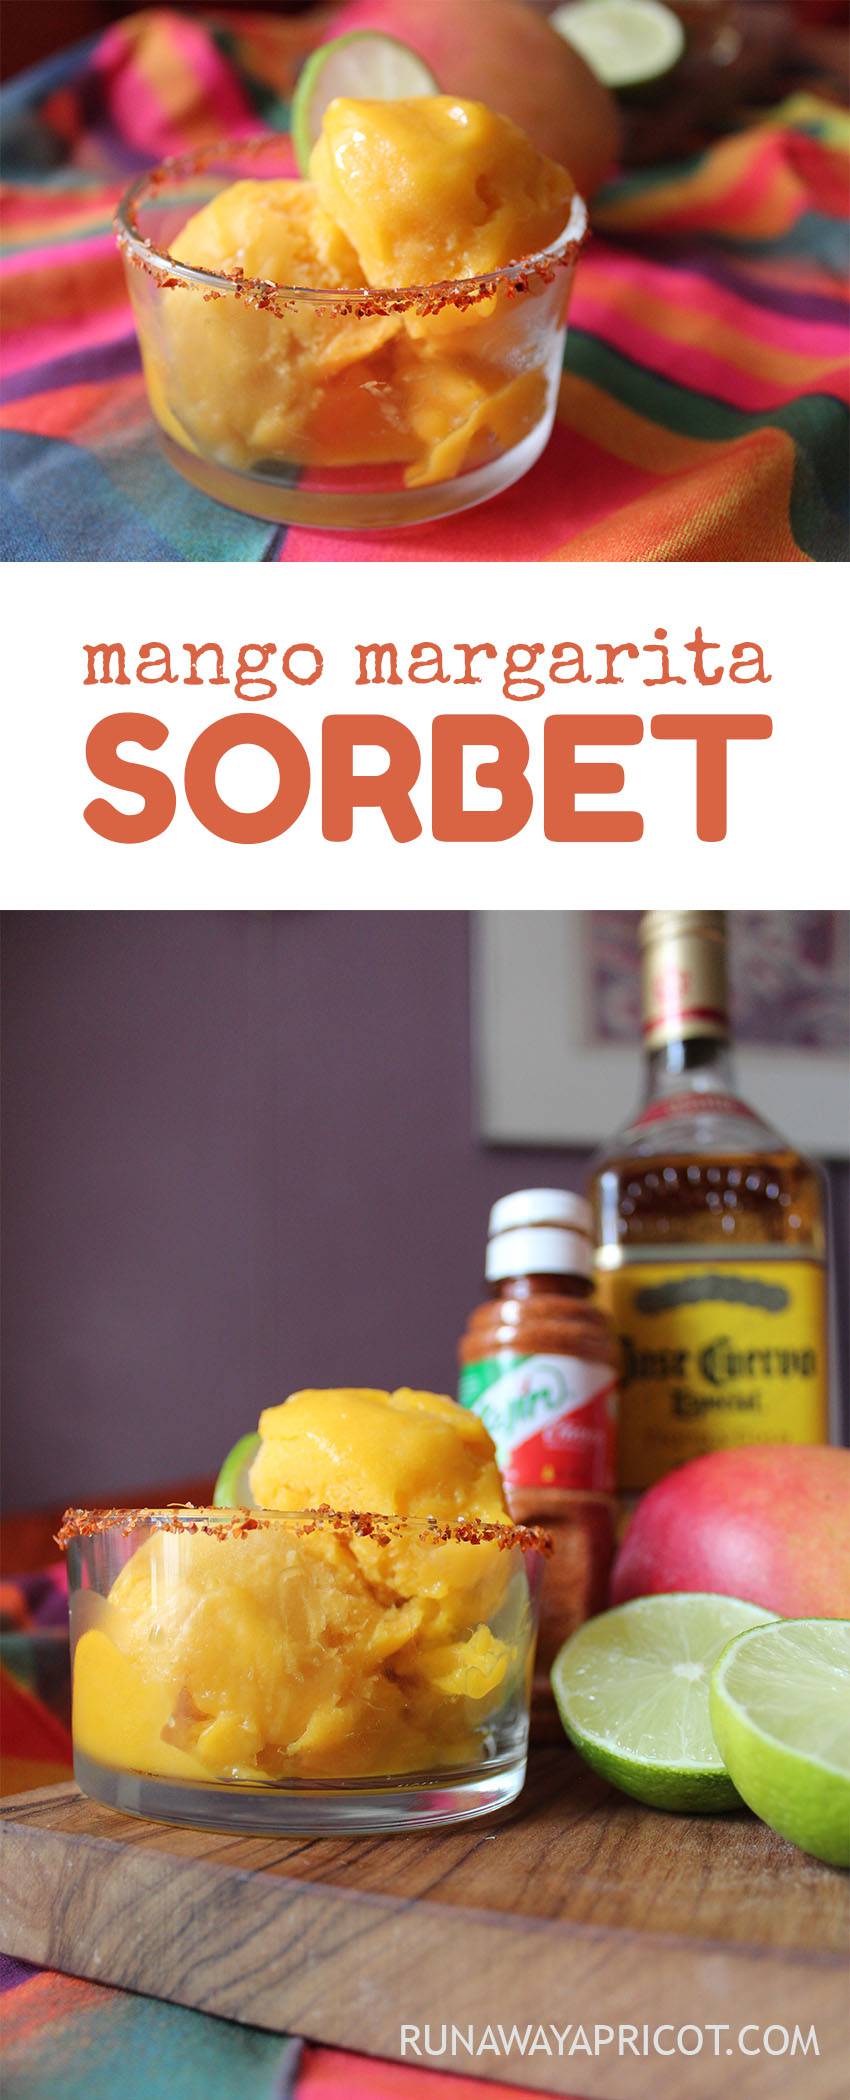 Mango Margarita Sorbet. Ripe and juicy mangoes blend with lime and tequila for a frozen treat that's happy at any hour.